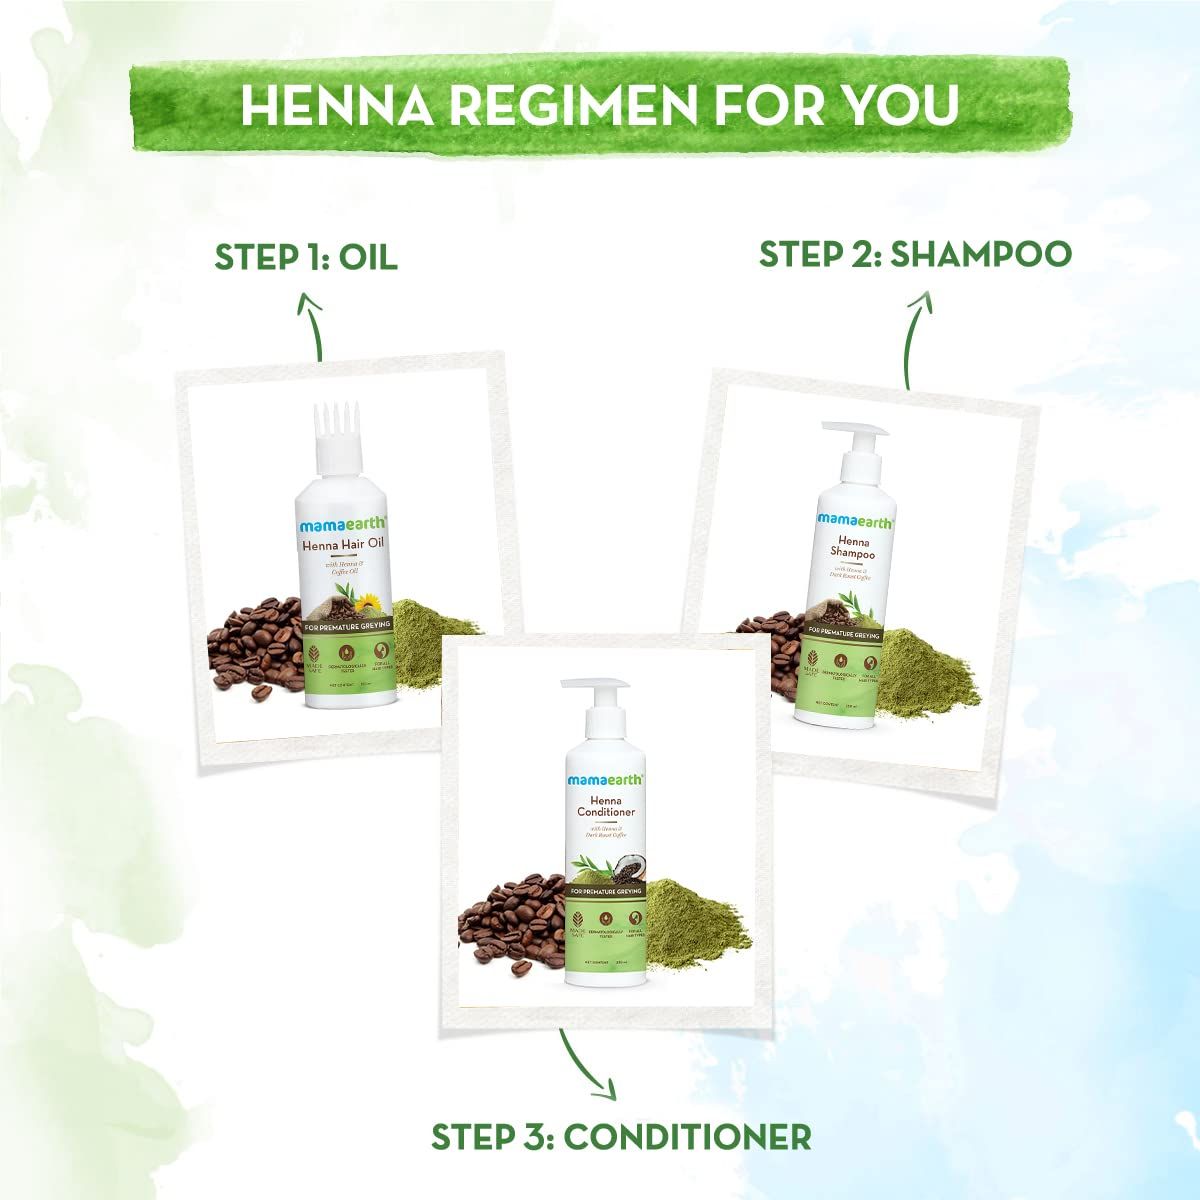 Henna Hair Oil with Henna & Coffee Oil for Premature Graying - 150 ml